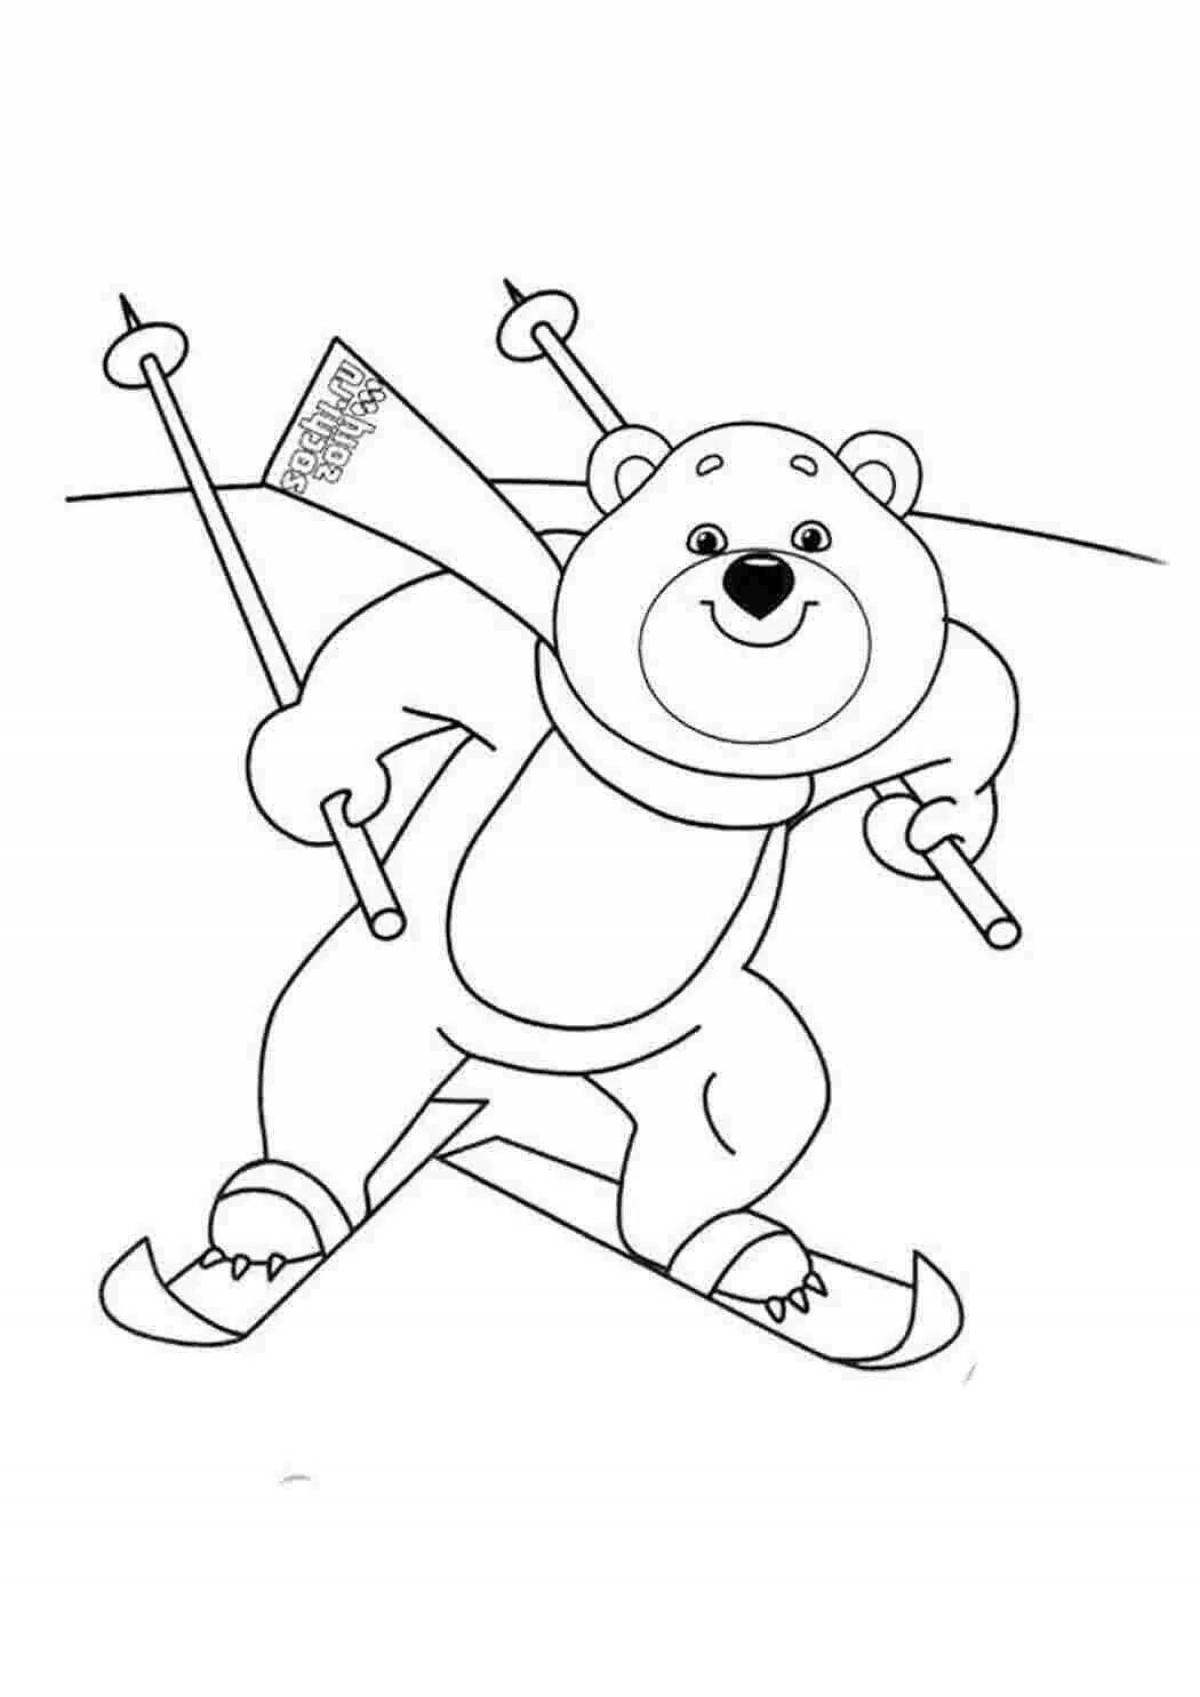 Colorful winter olympic games coloring page